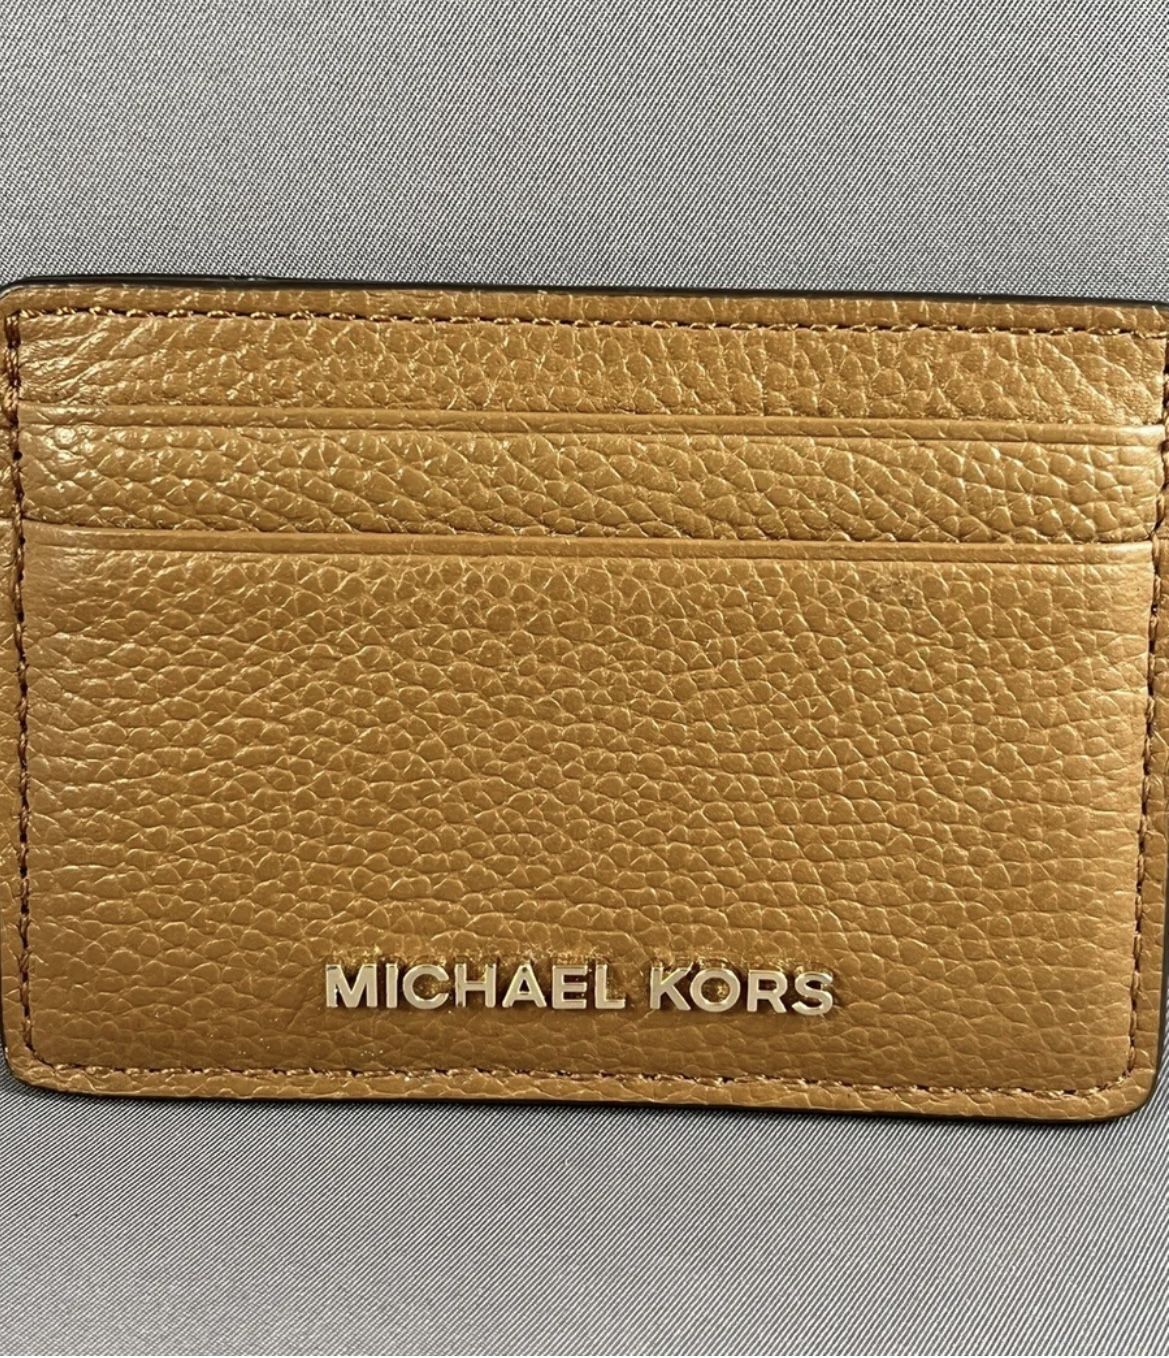 Michael Kors Pebbled Leather Card Case